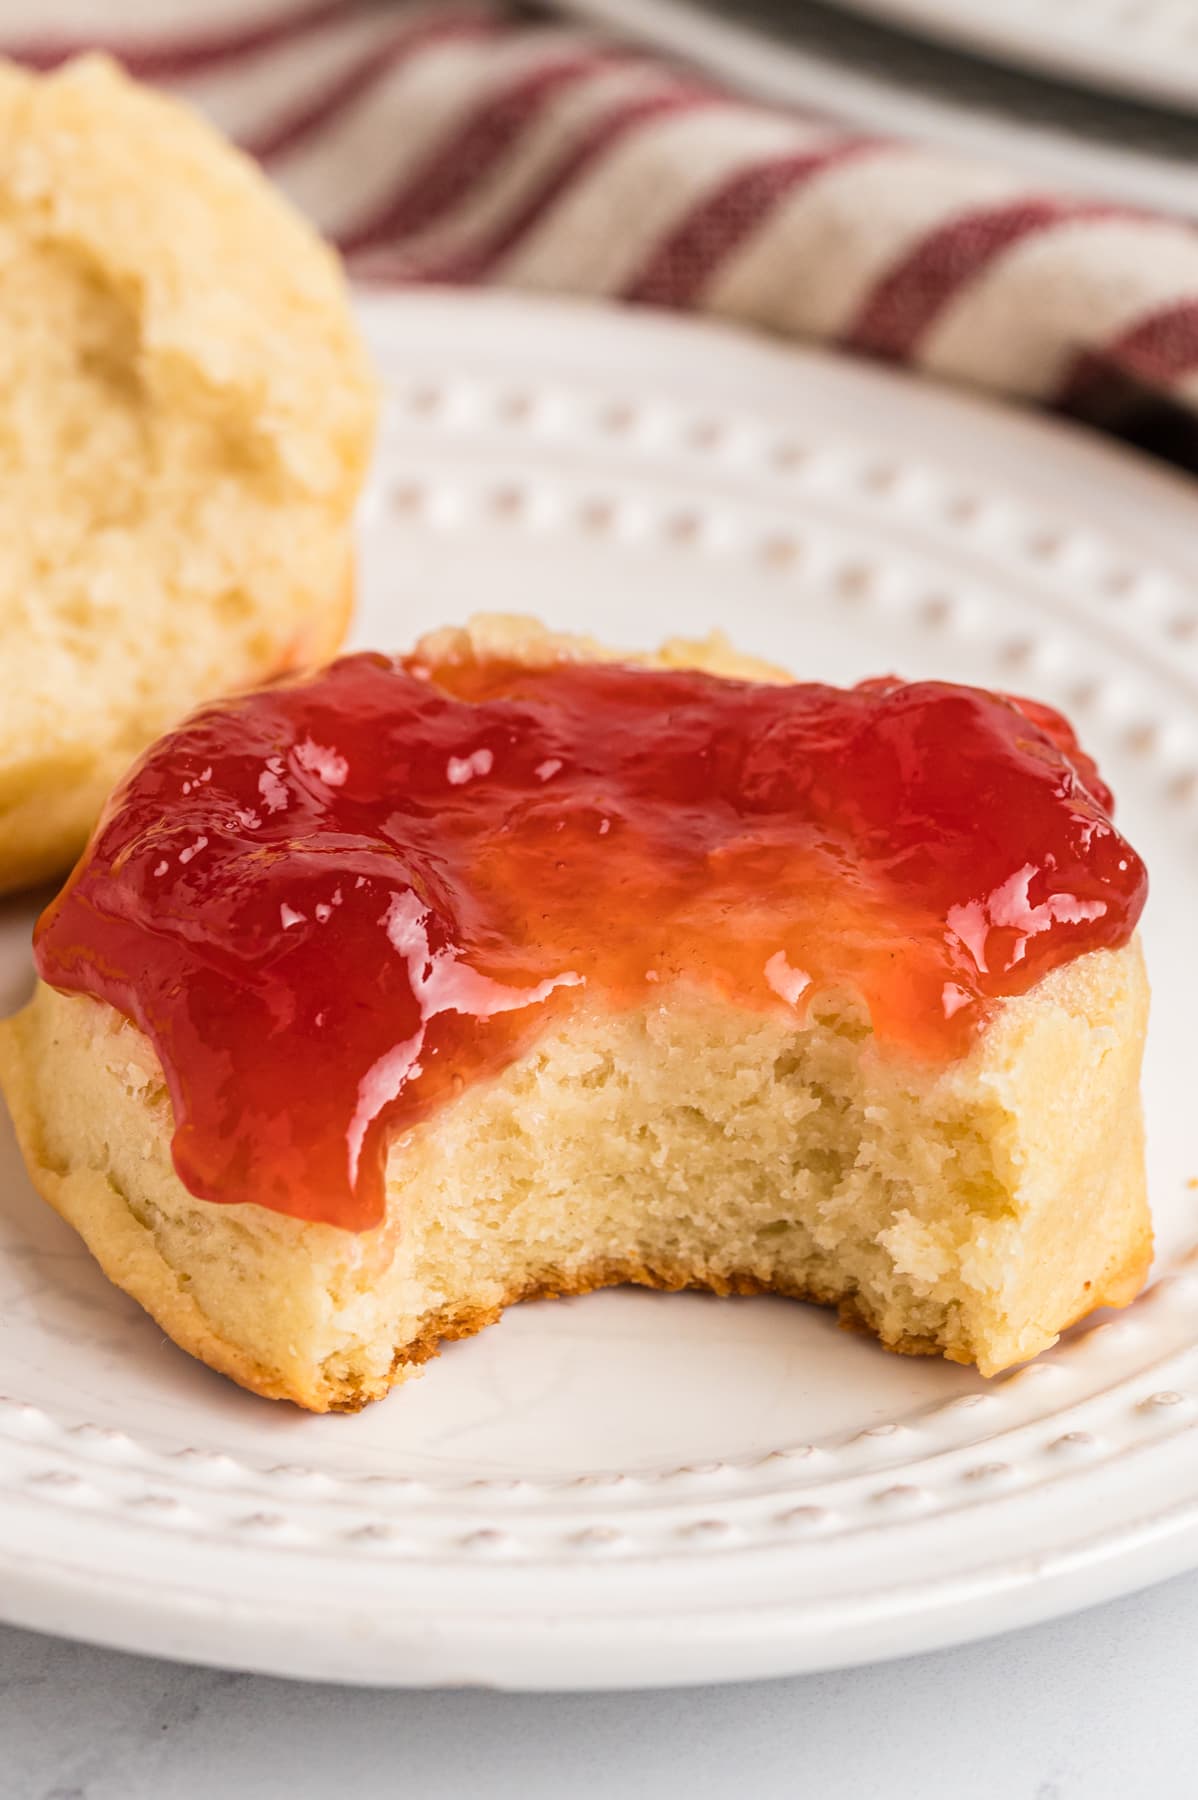 A biscuit with jelly and a bite missing